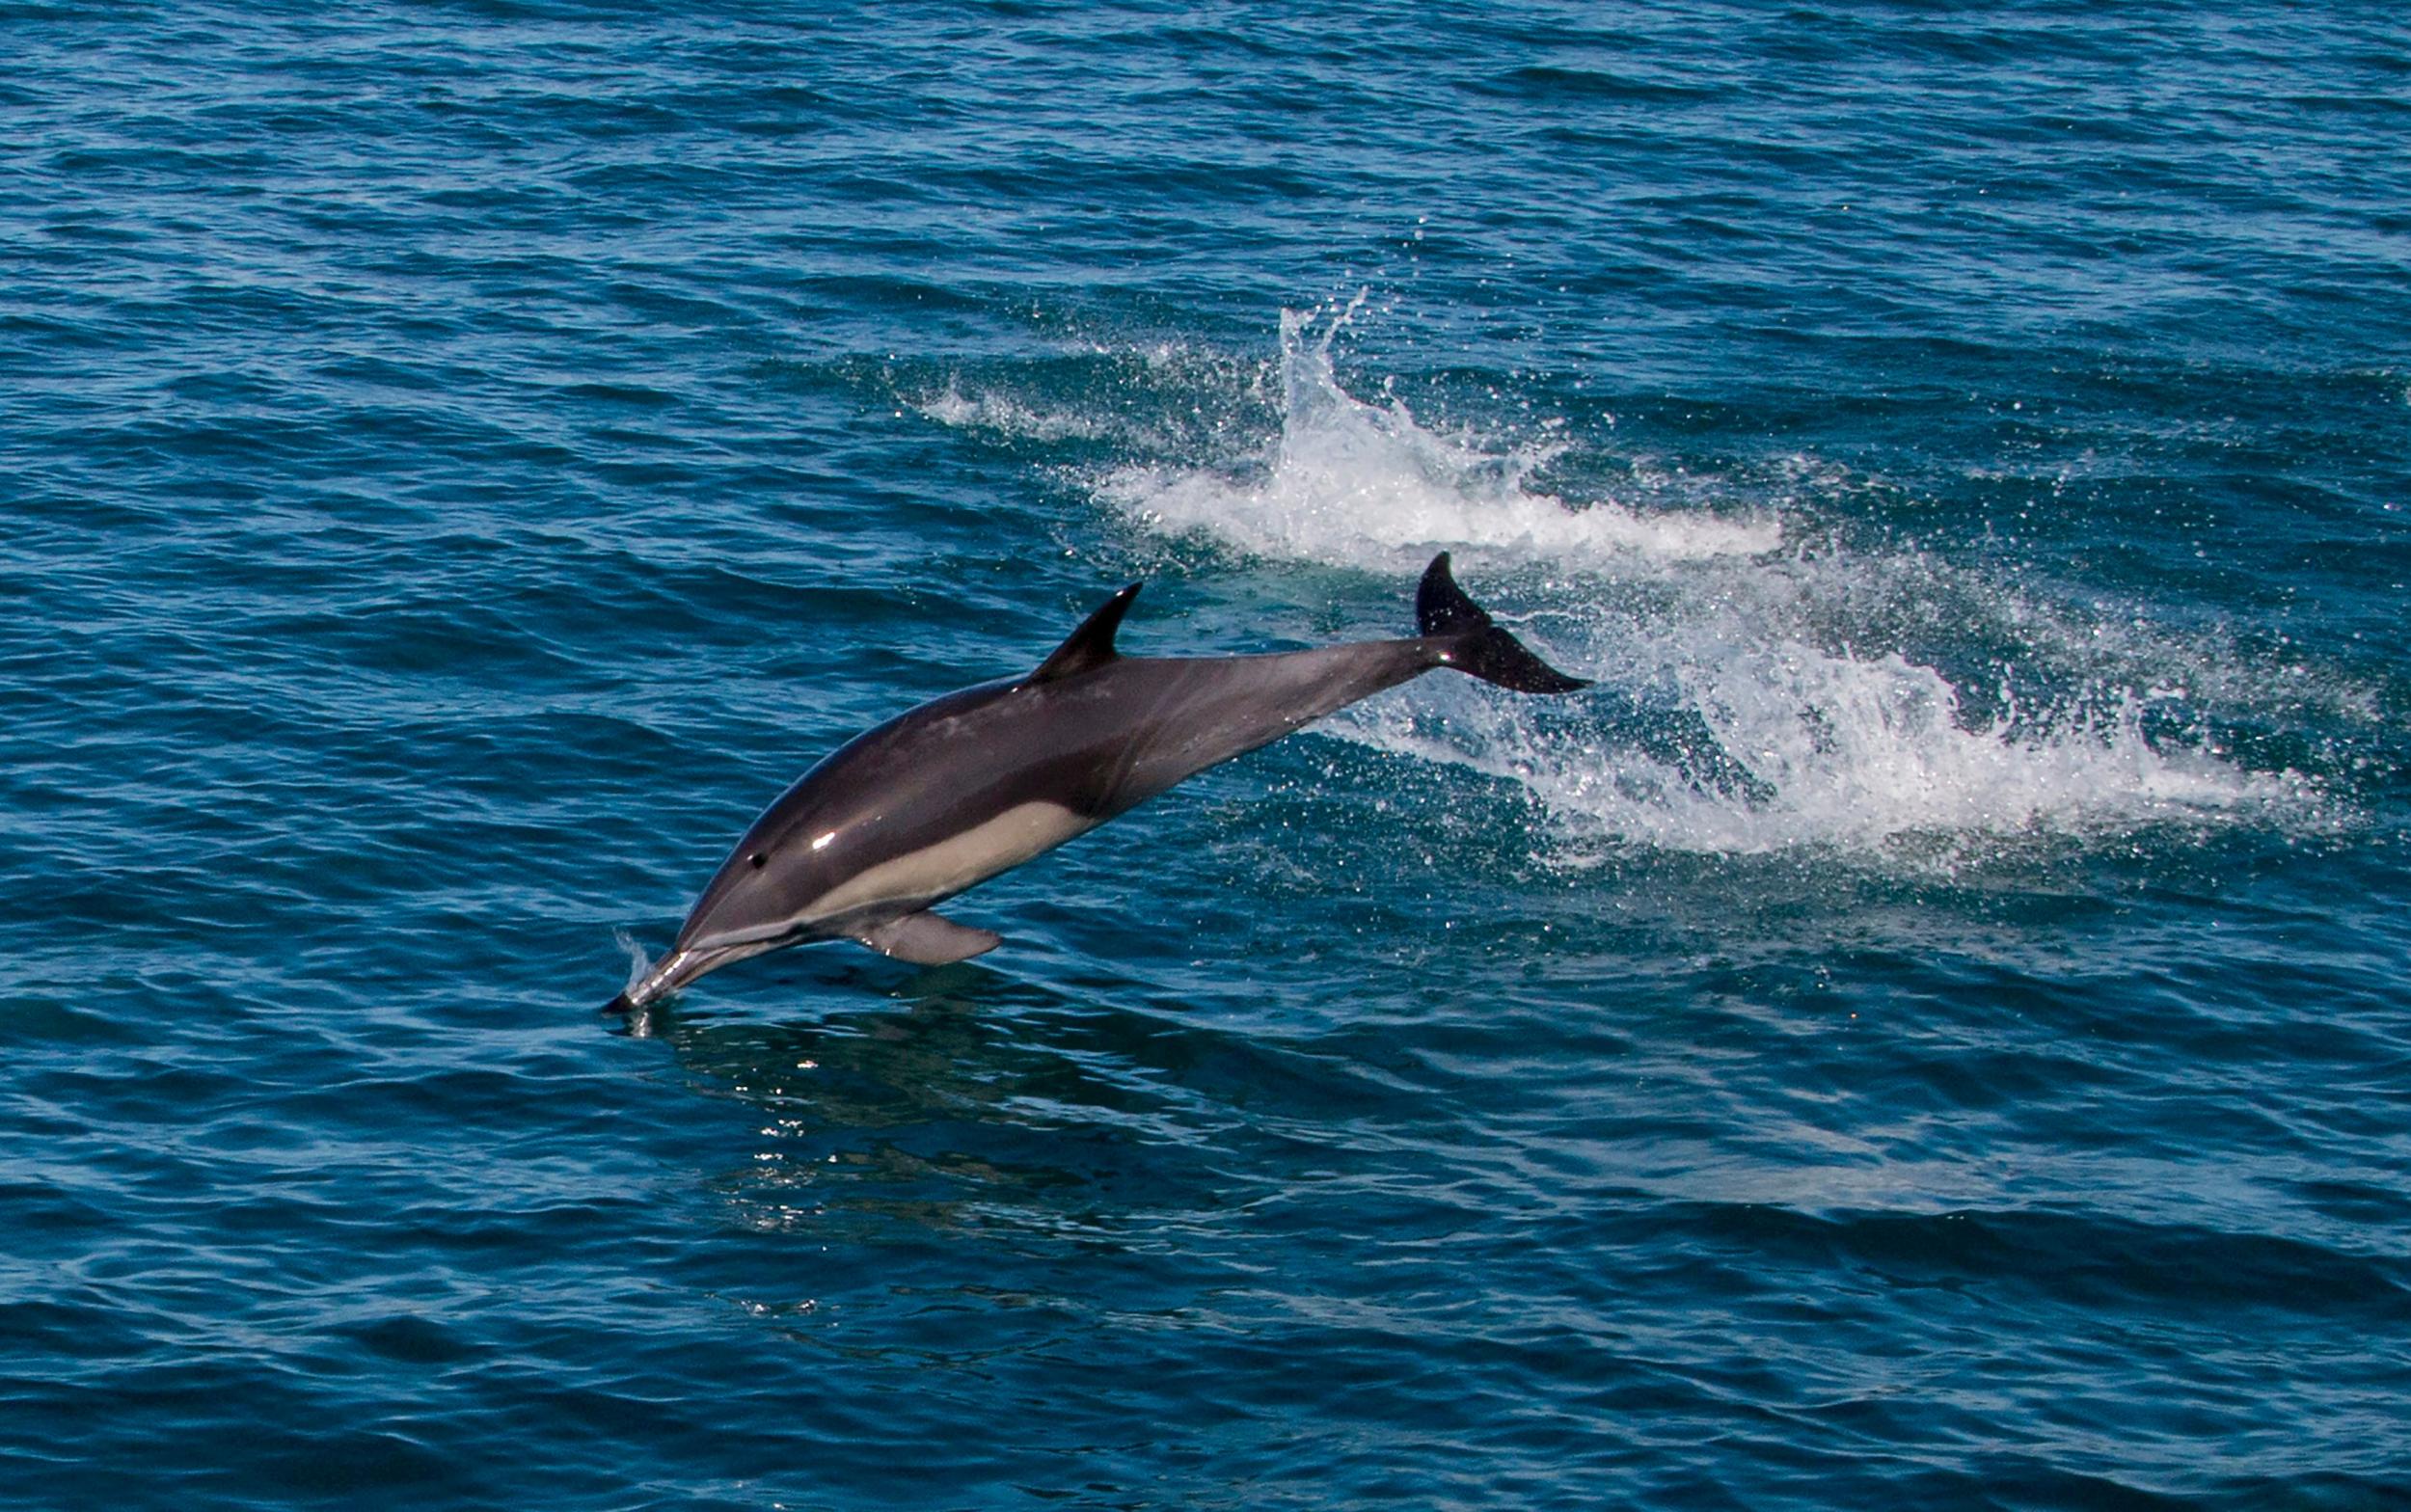 When it comes to dolphins, TripAdvisor's new policy is look but don't touch